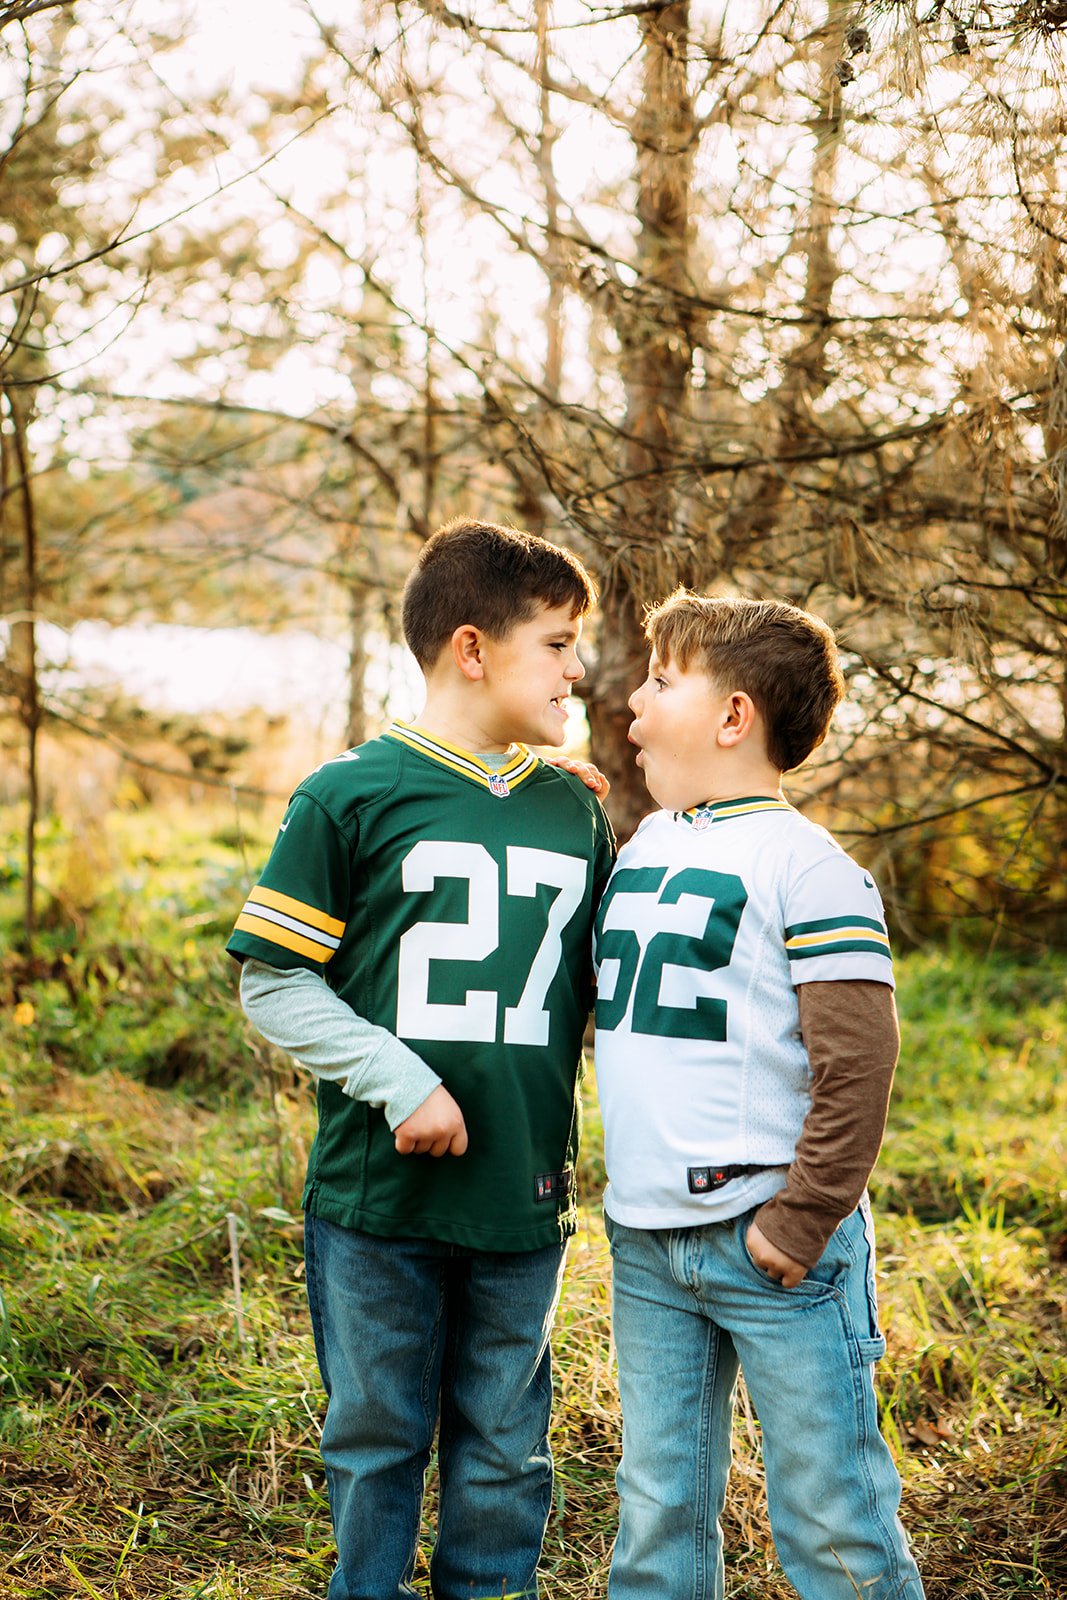  Two brothers wearing football jerseys and making silly faces at one another by Teala Ward Photography. football jersey brothers #TealaWardPhotography #TealaWardFamilies #holidayfamilypics #photography #Illinoisfamilyphotography #familysession 